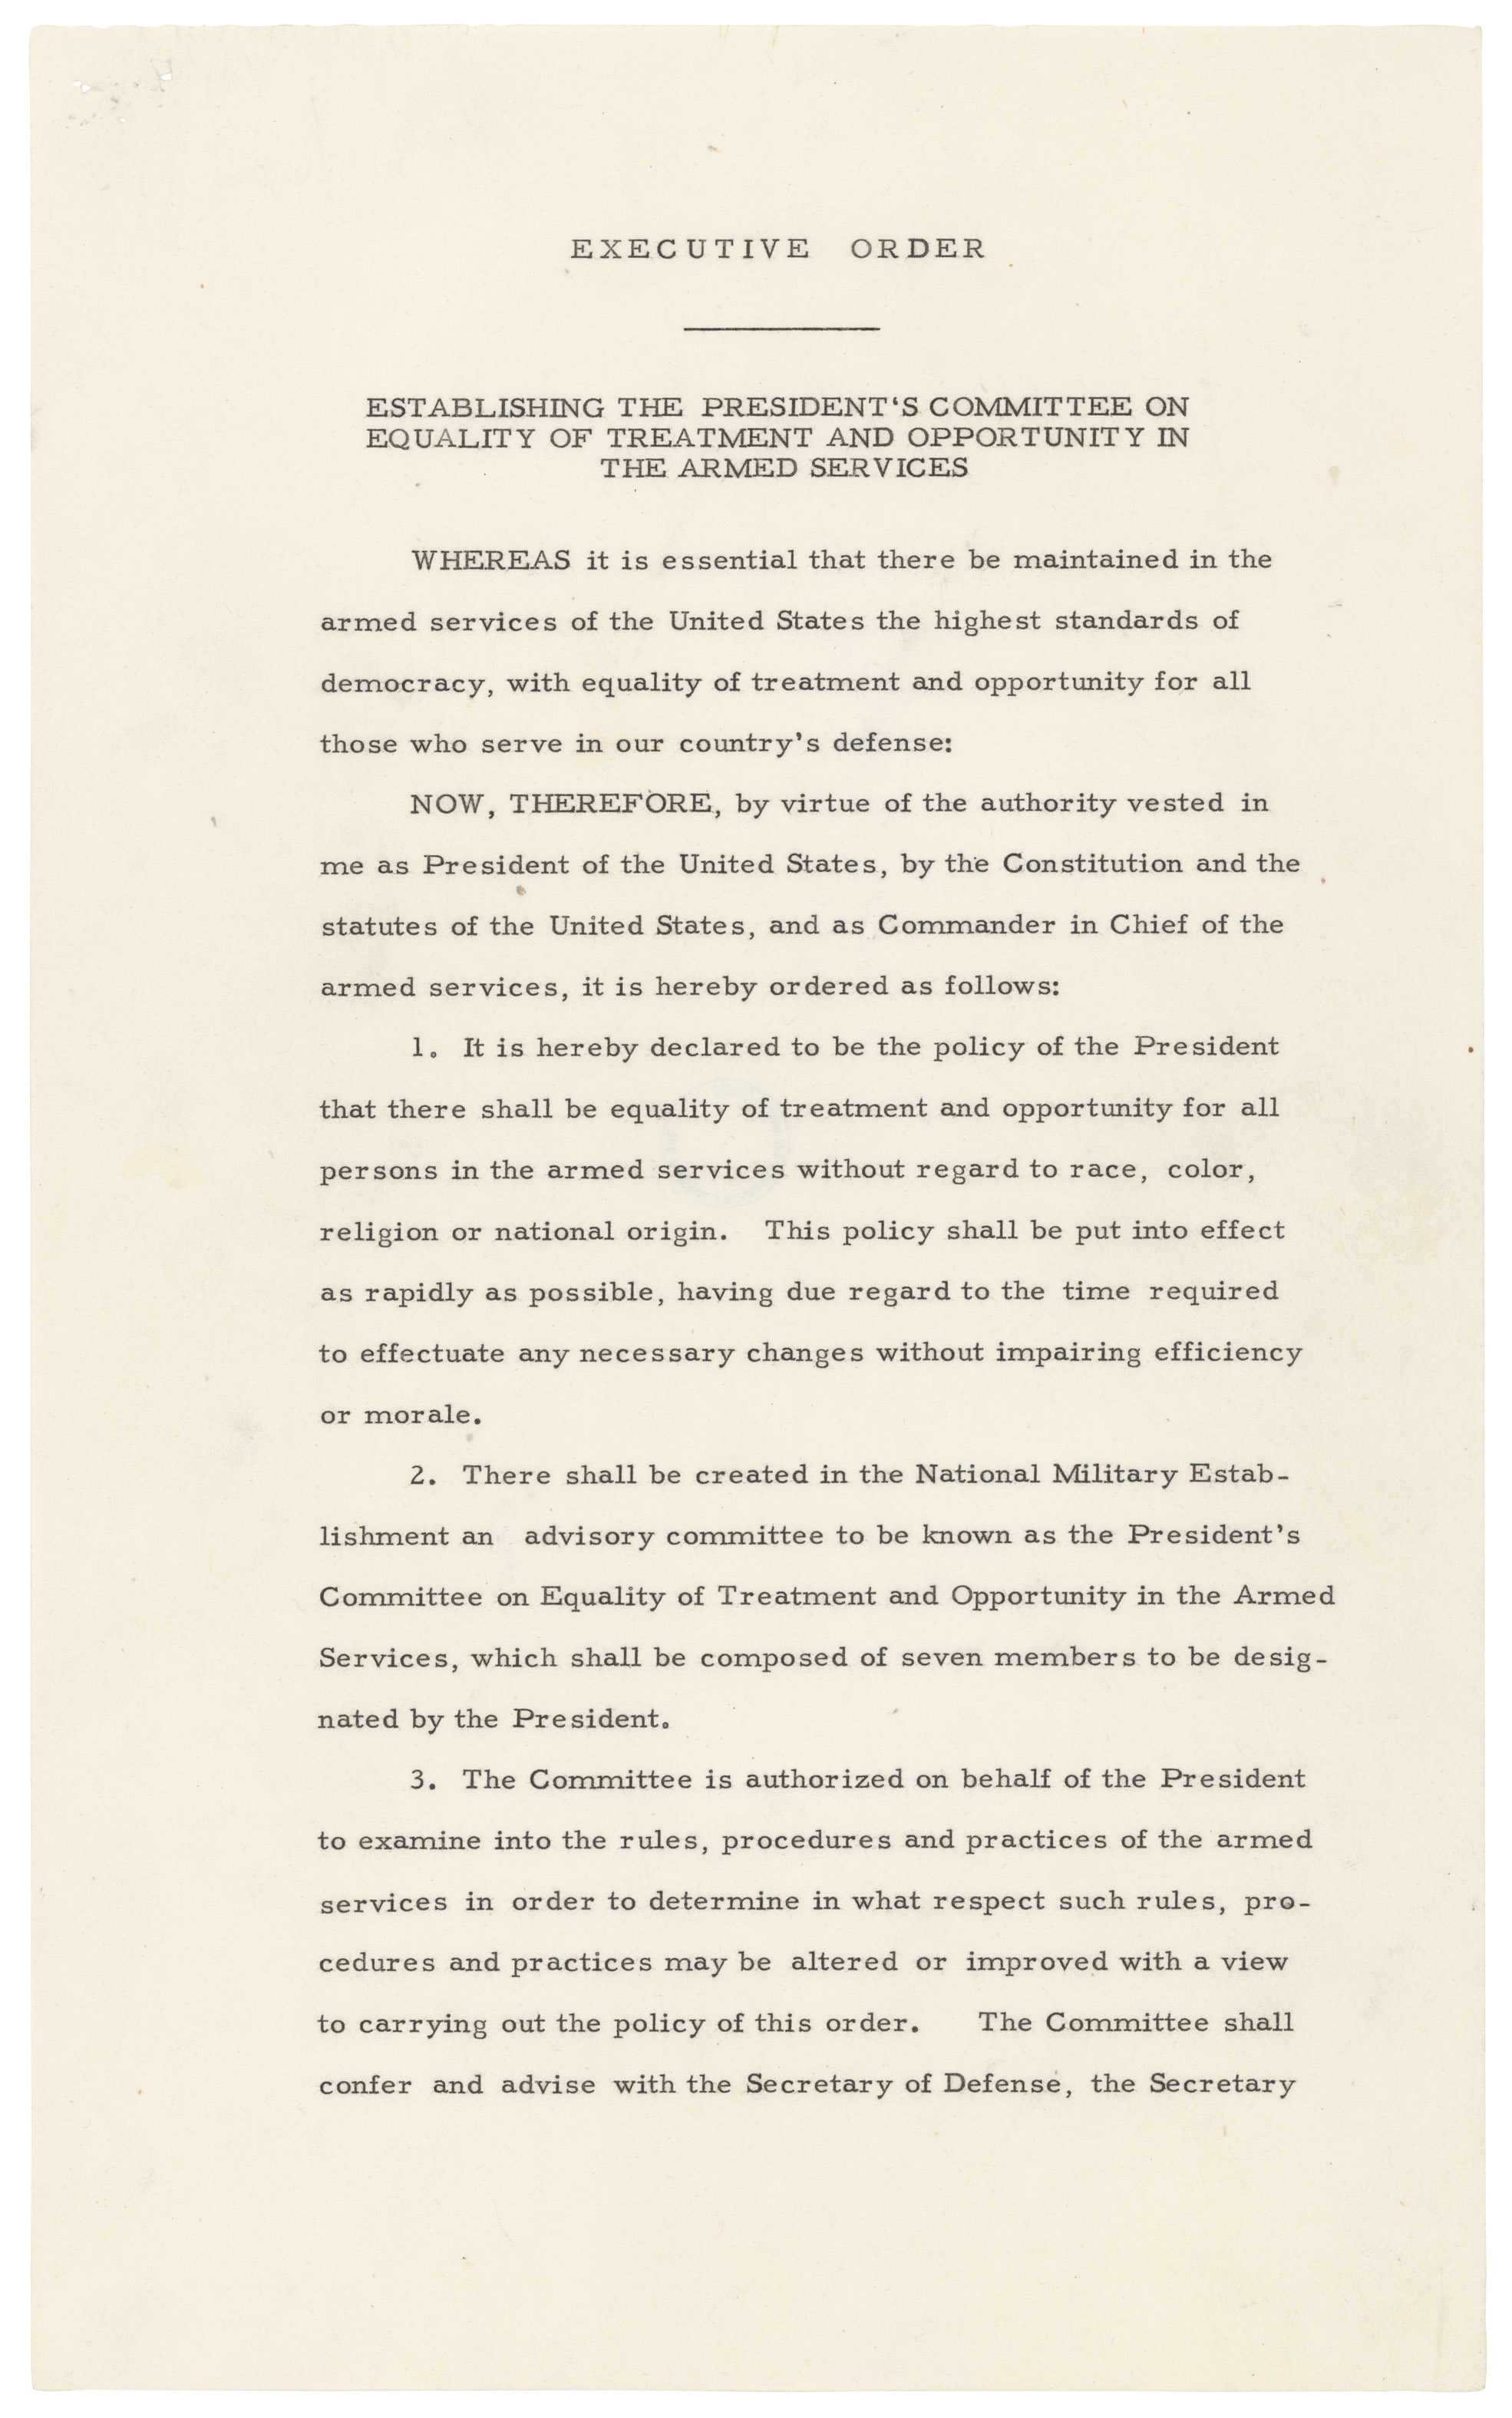 Executive Order 9981 dated July 26, 1948 page 1